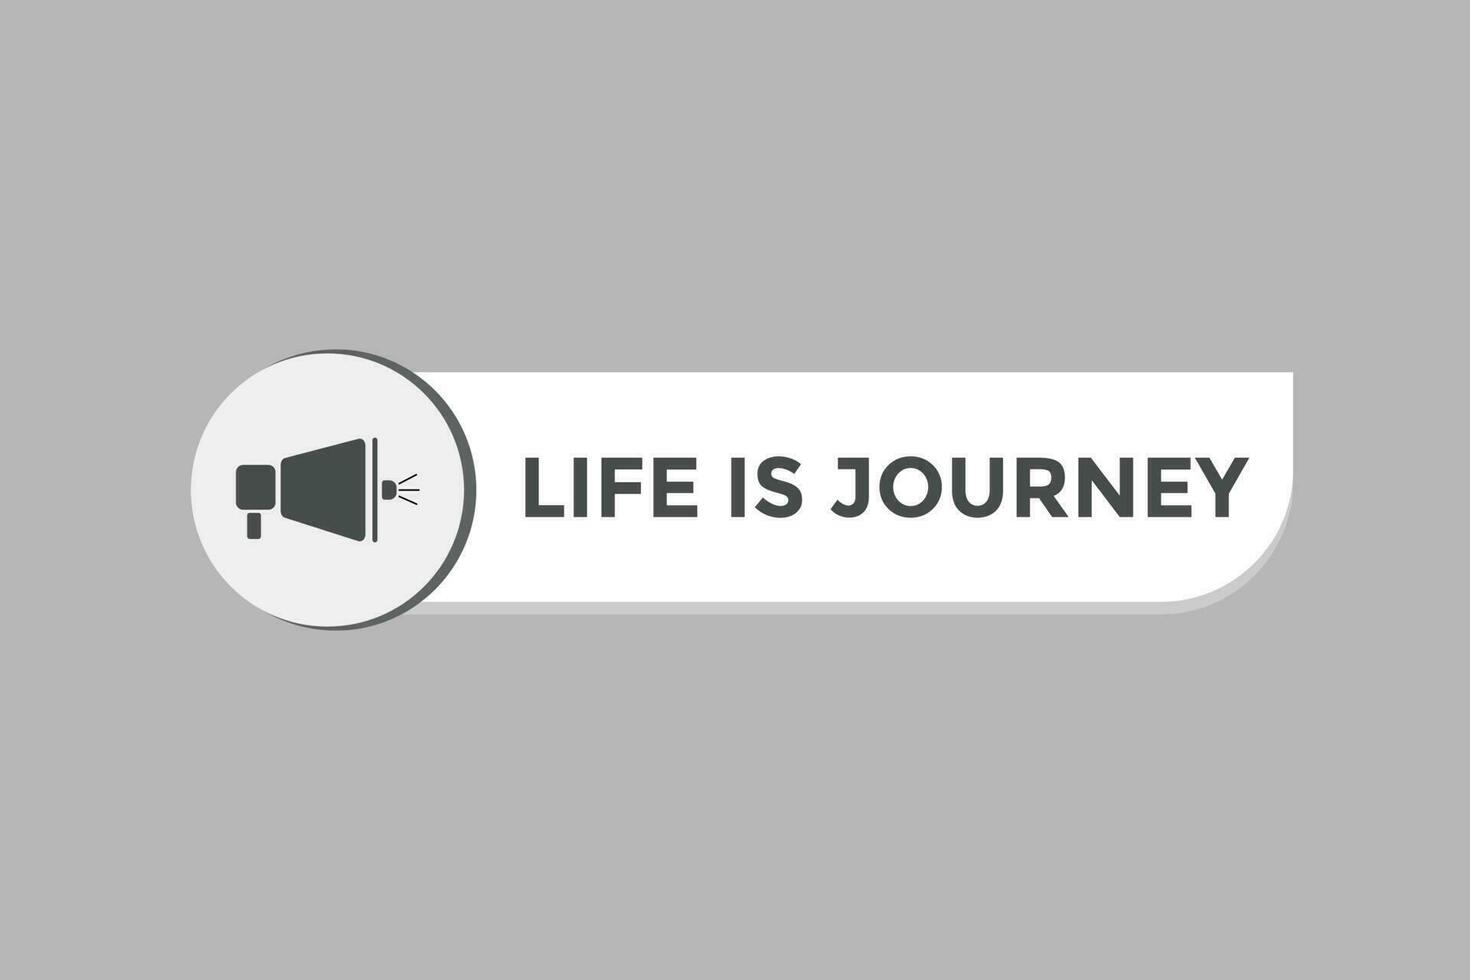 Life is Journey Button. Speech Bubble, Banner Label Life is Journey vector